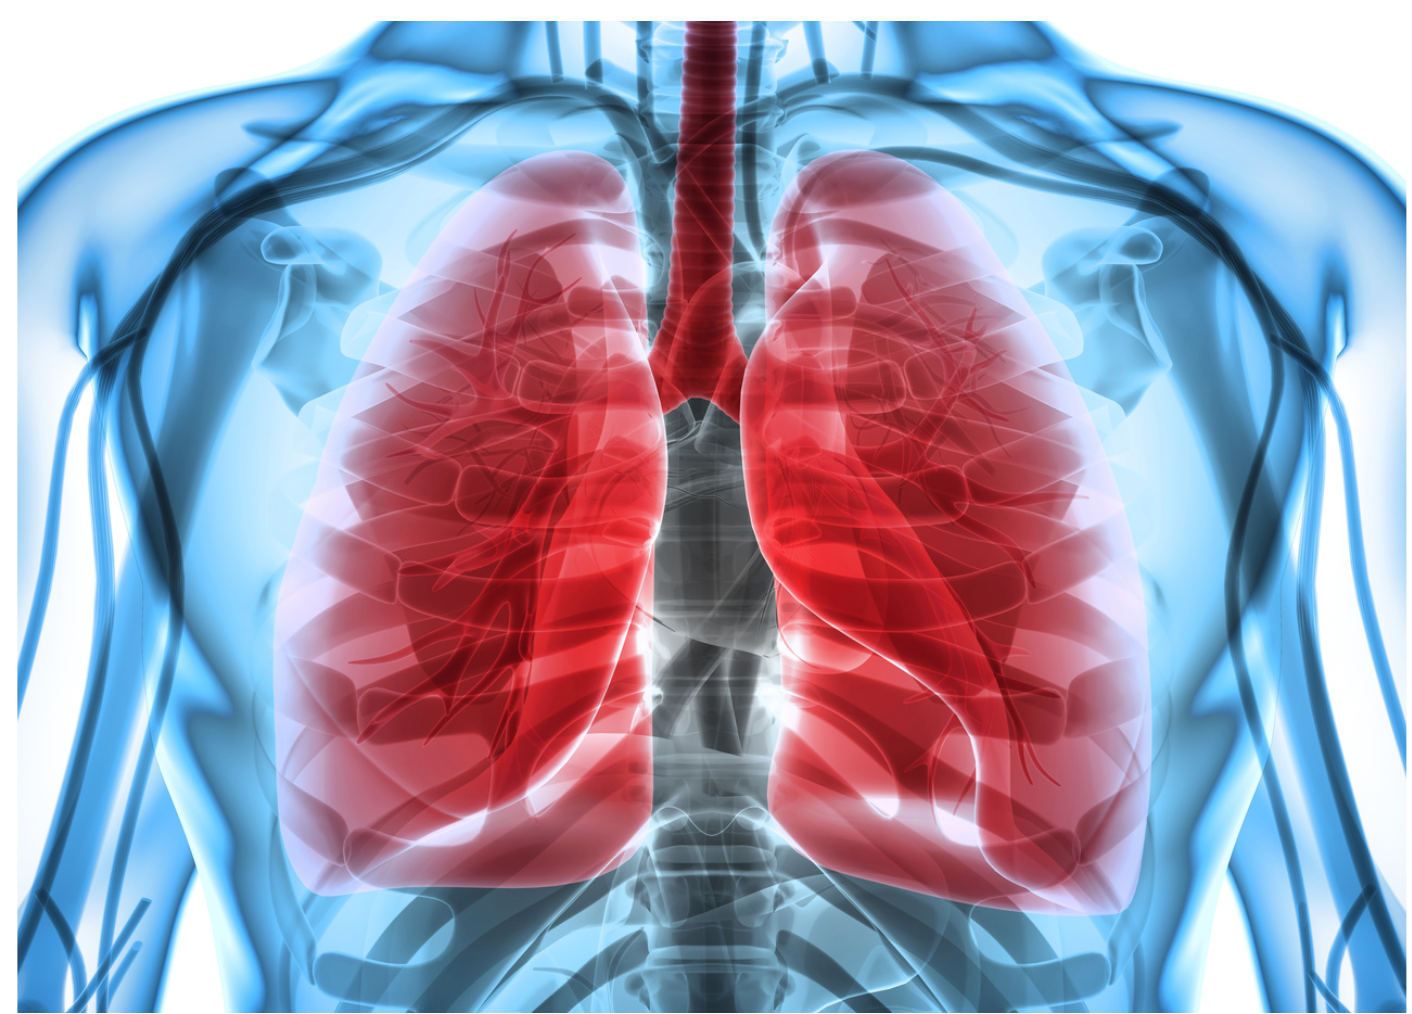 Novel Investigational Treatment Slows Lung Function Decline in Patients With Idiopathic Pulmonary Fibrosis